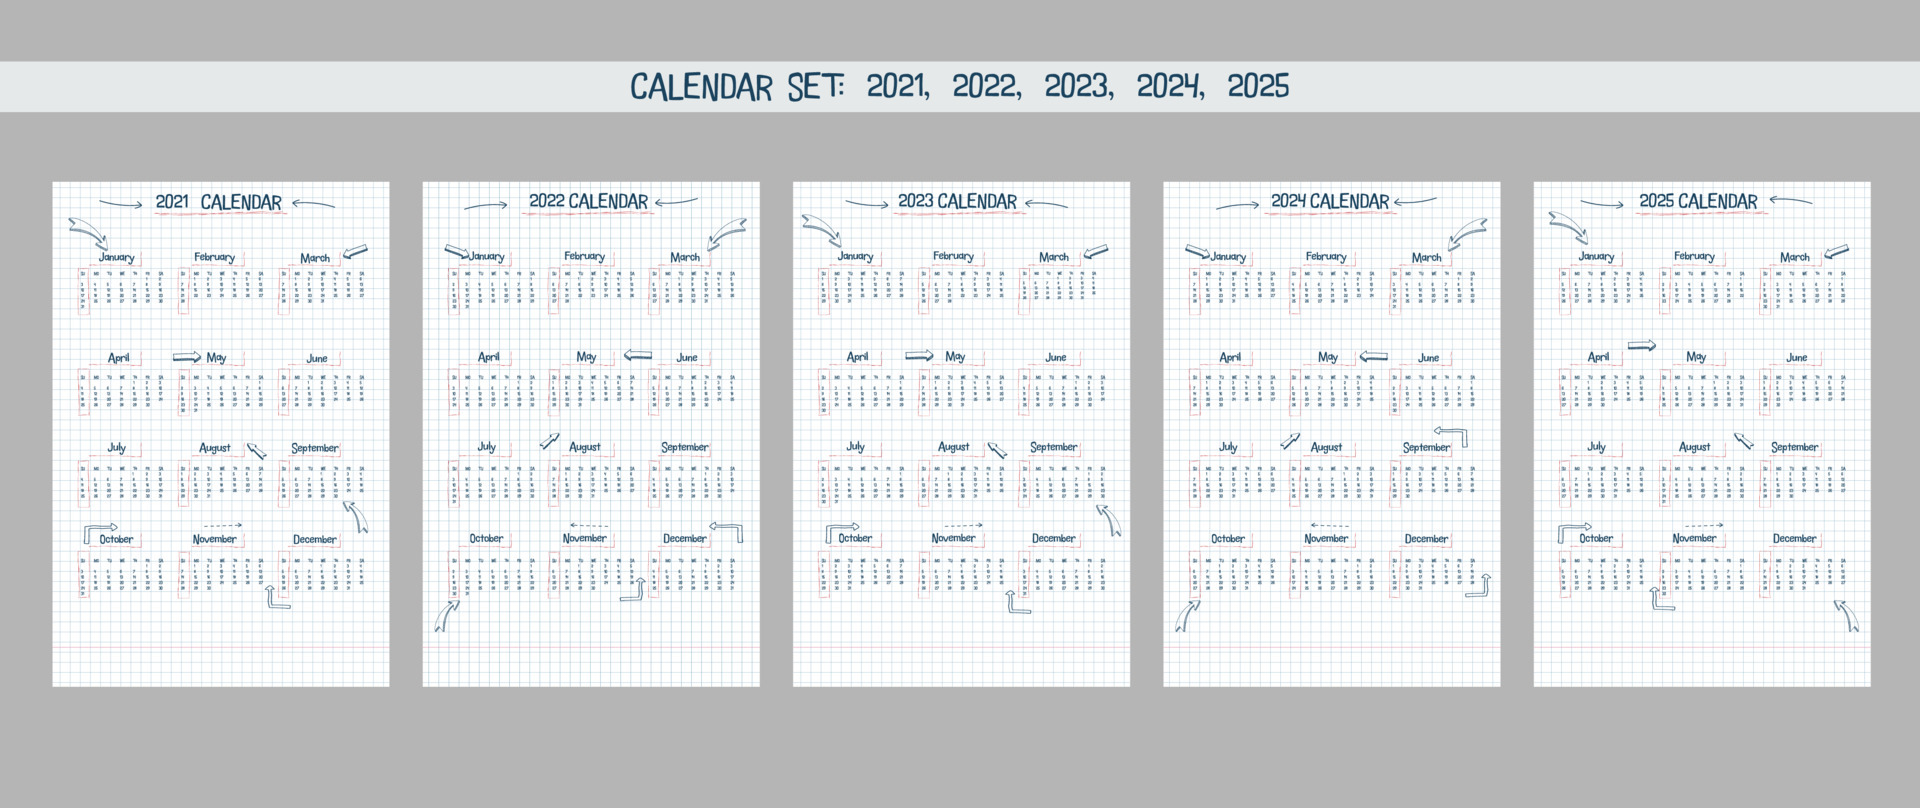 Sscps Calendar 2024 Scps Calender Customize and Print